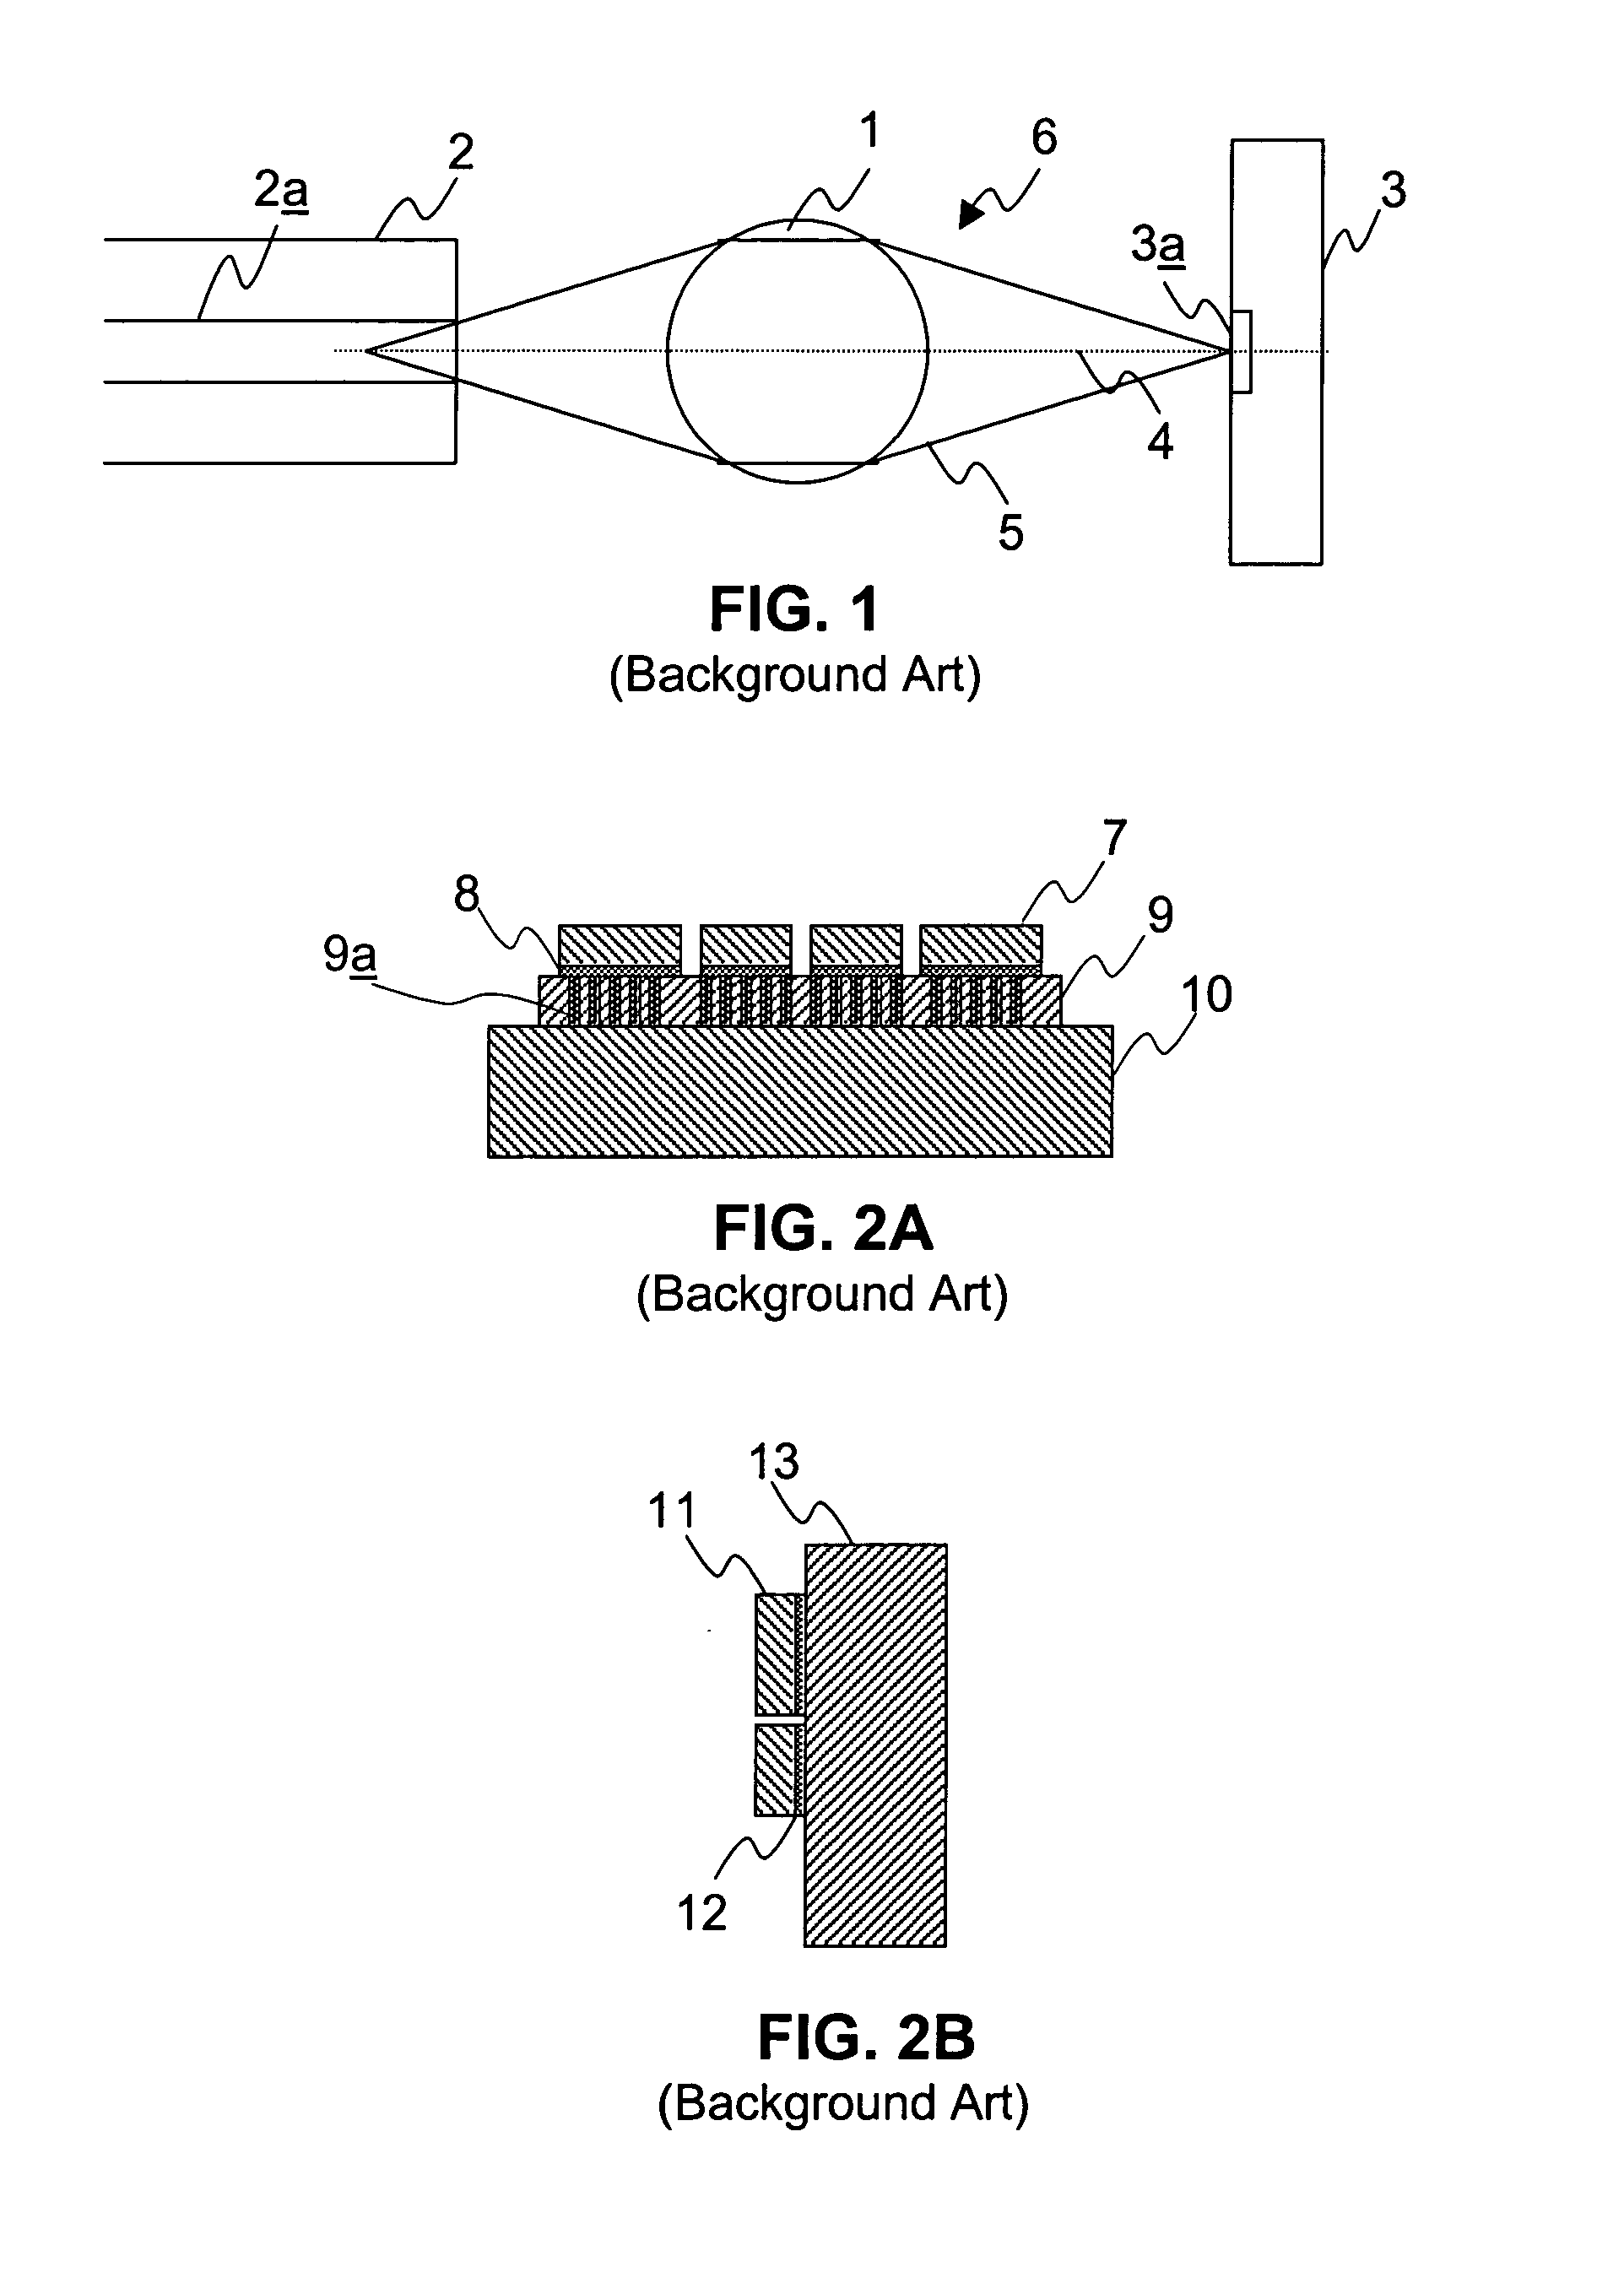 Methods of improving reliability of an electro-optical module